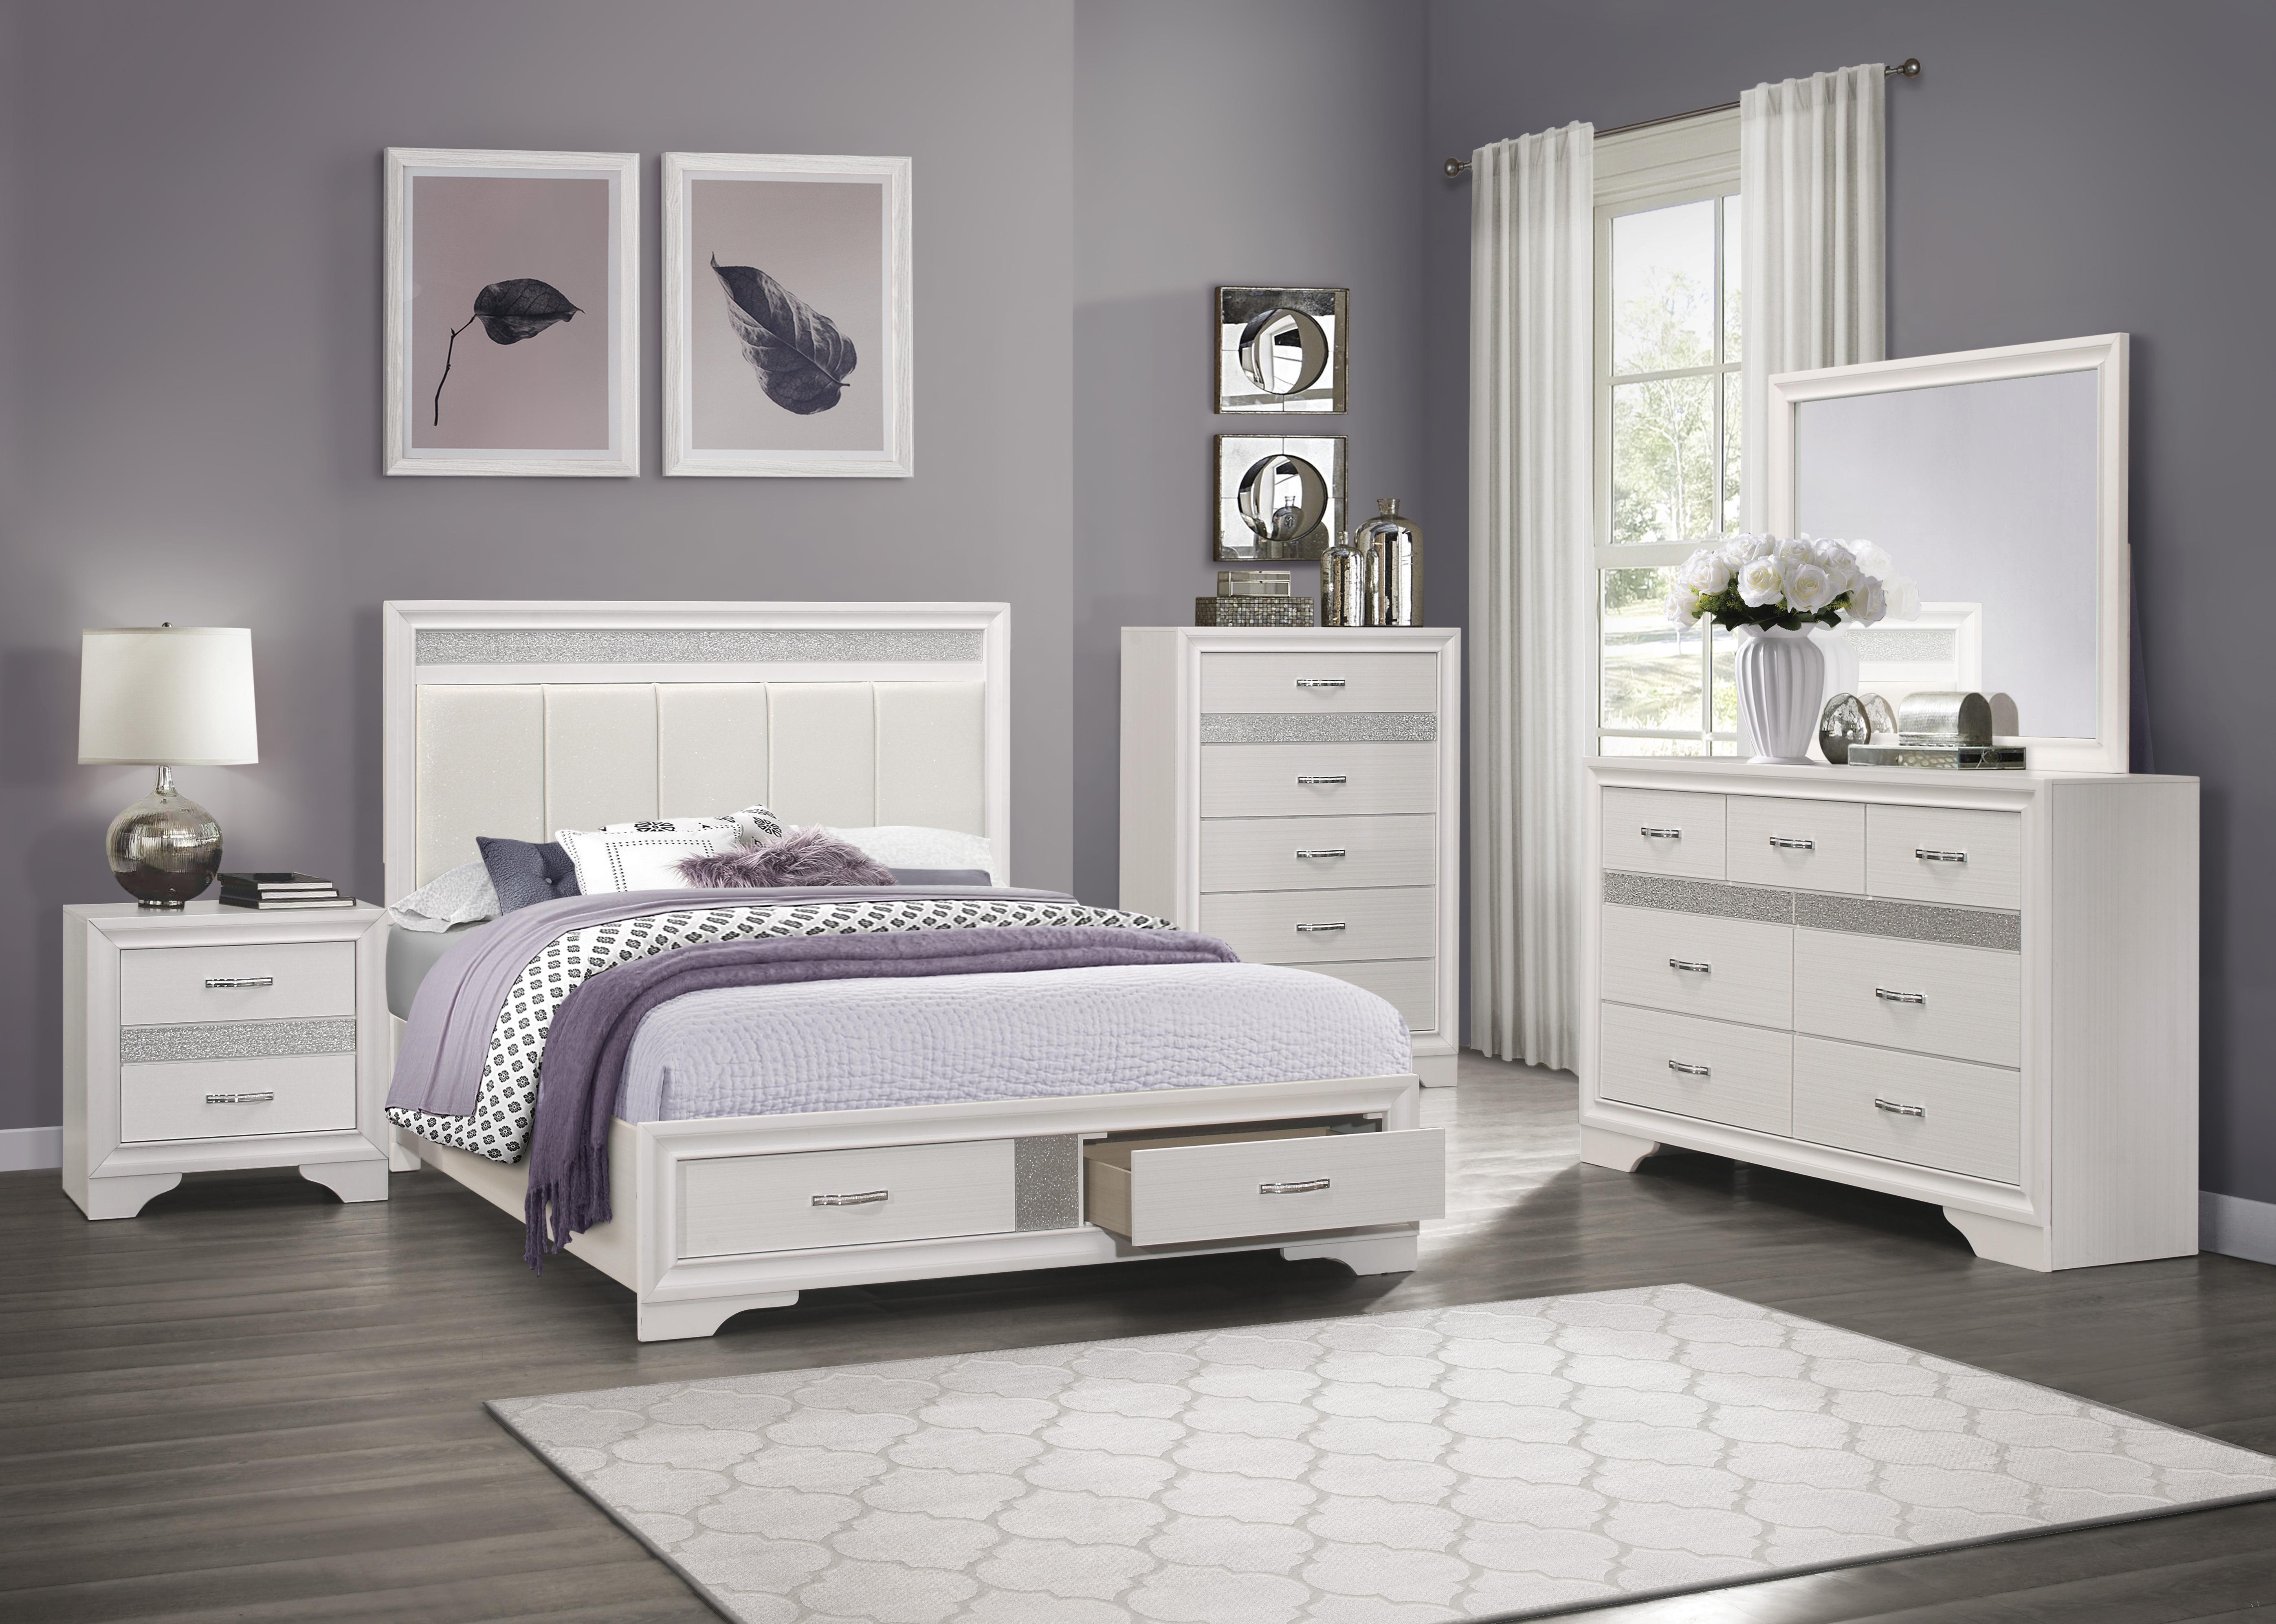 Modern Bedroom Set 1505WK-1CK-5PC Luster 1505WK-1CK-5PC in White Faux Leather